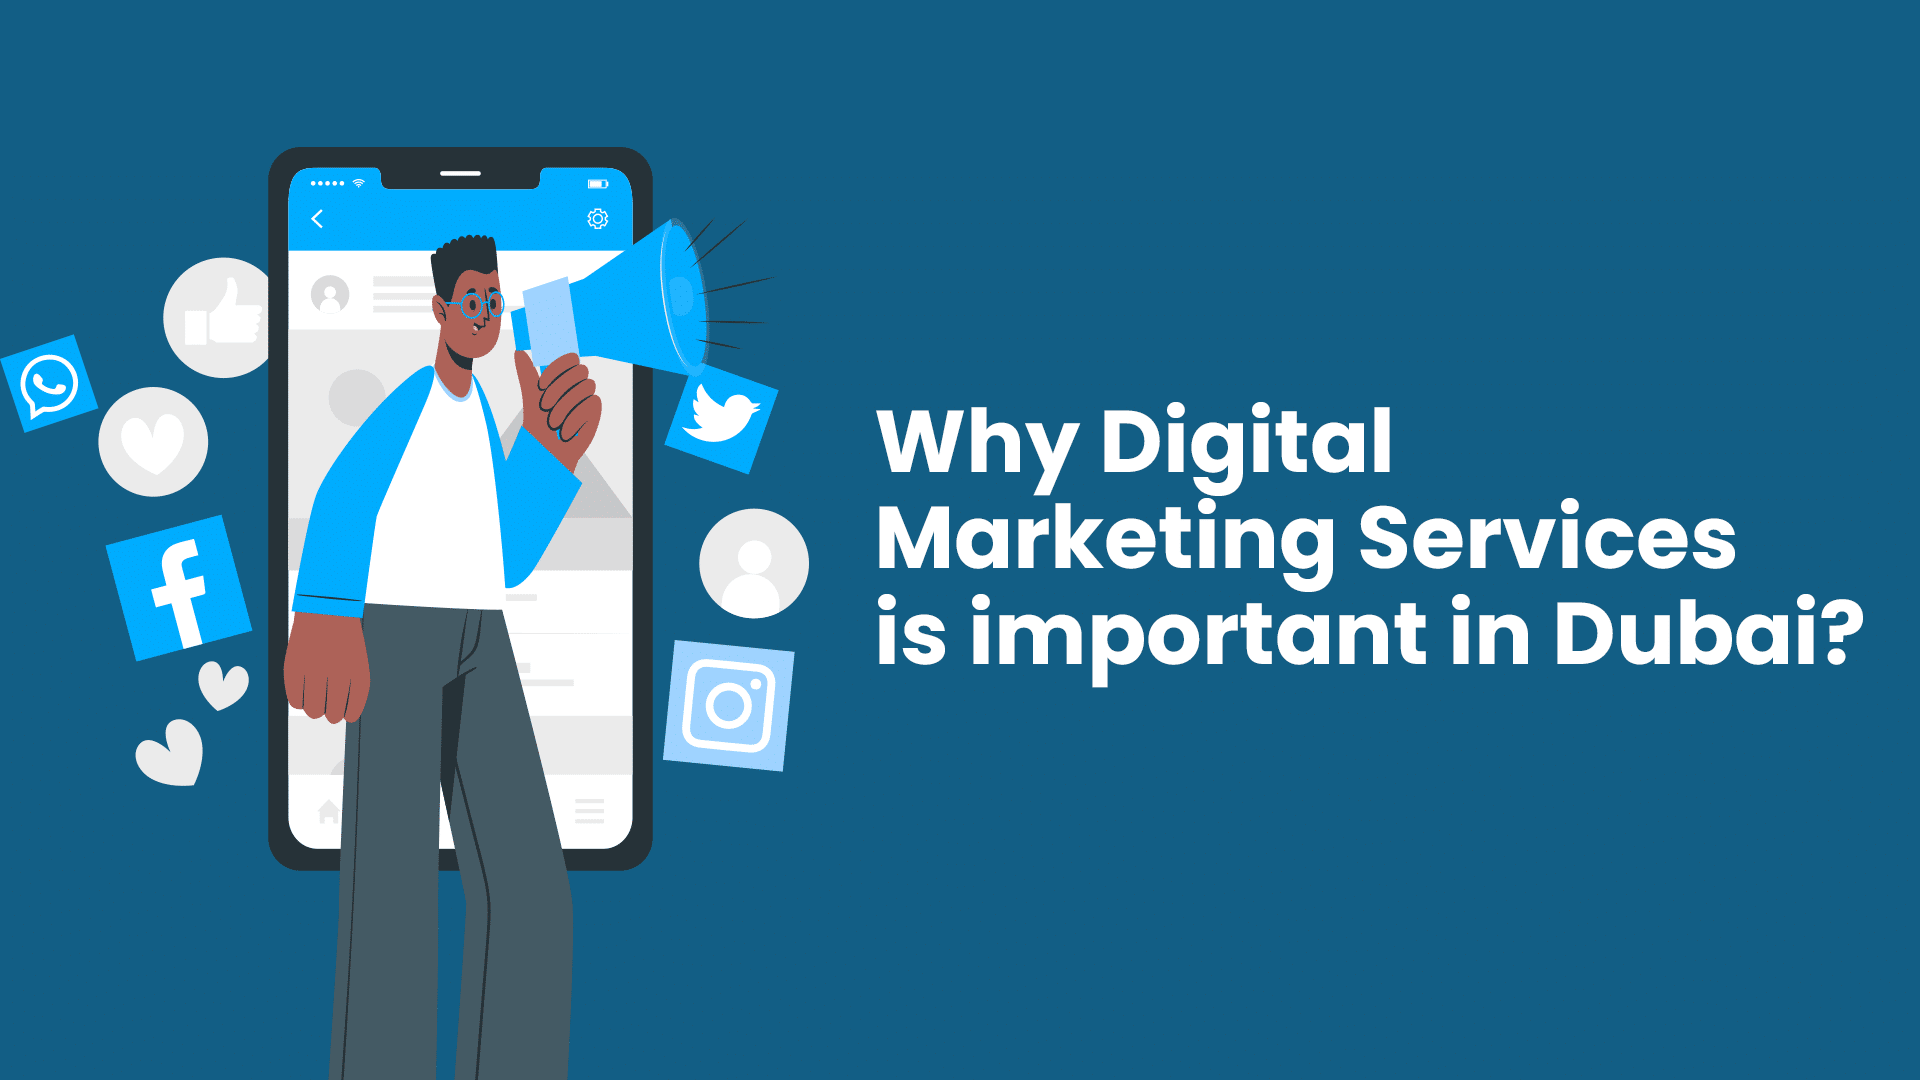 Digital Marketing Services – A Must Have for Dubai based companies